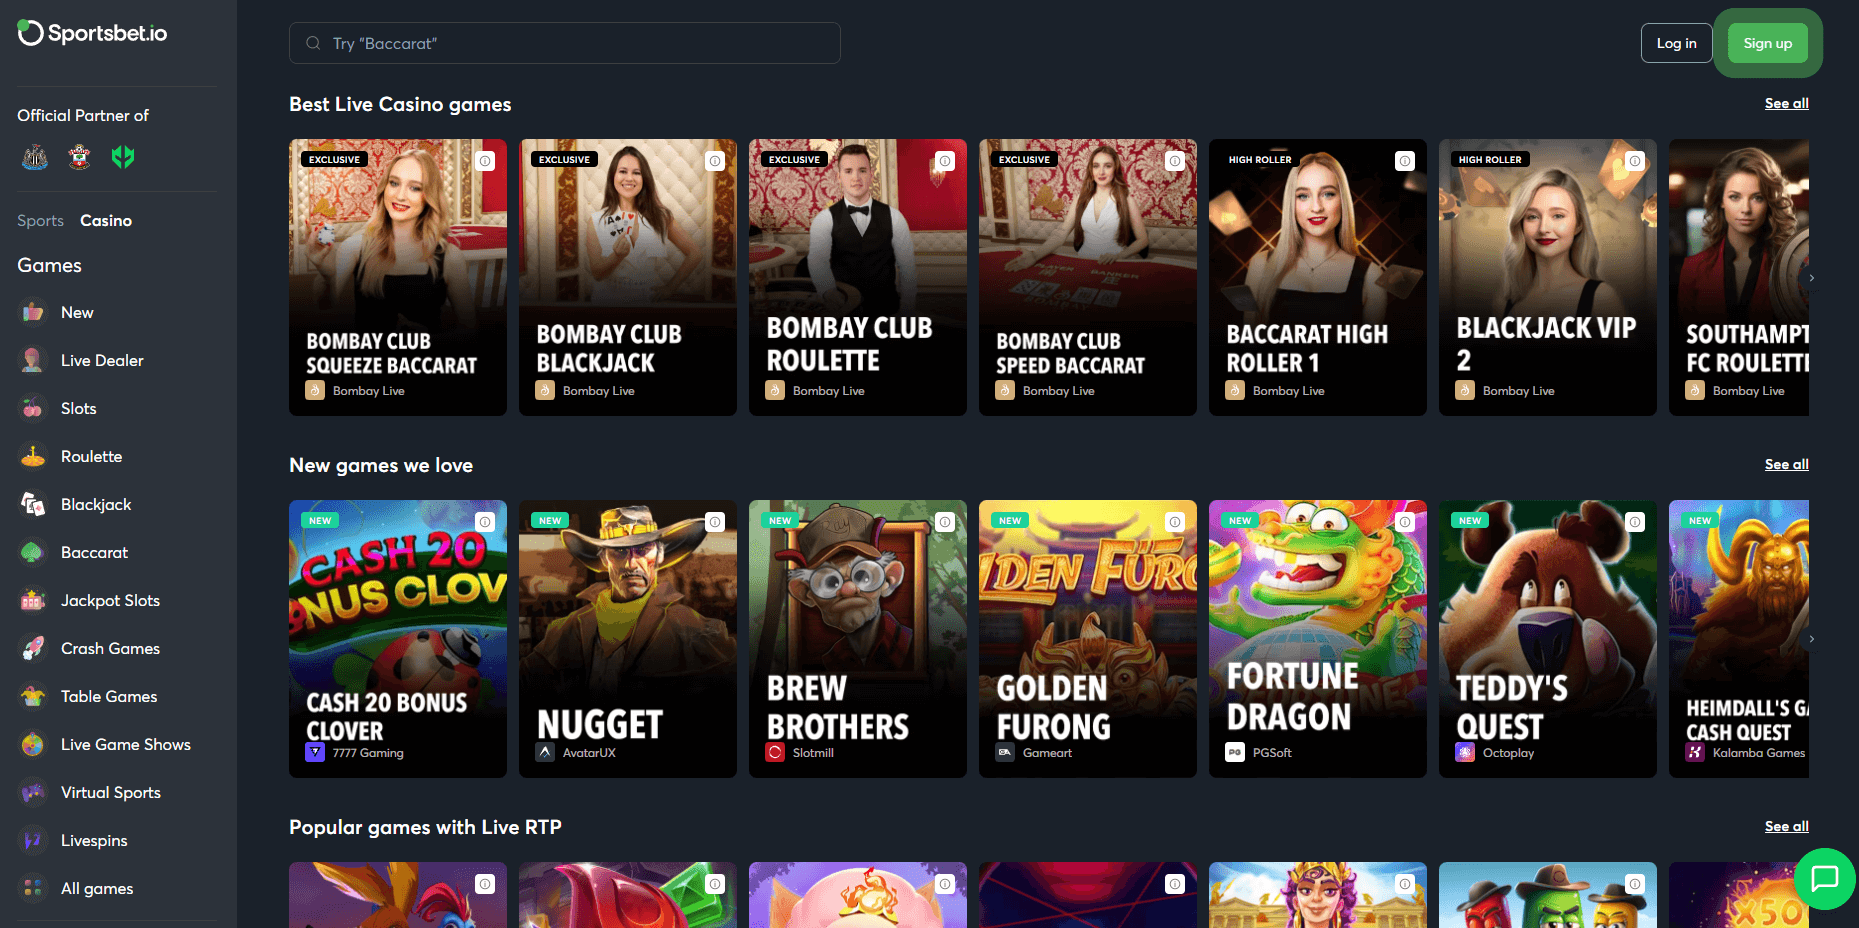 Sportsbet Casino Slots and Games